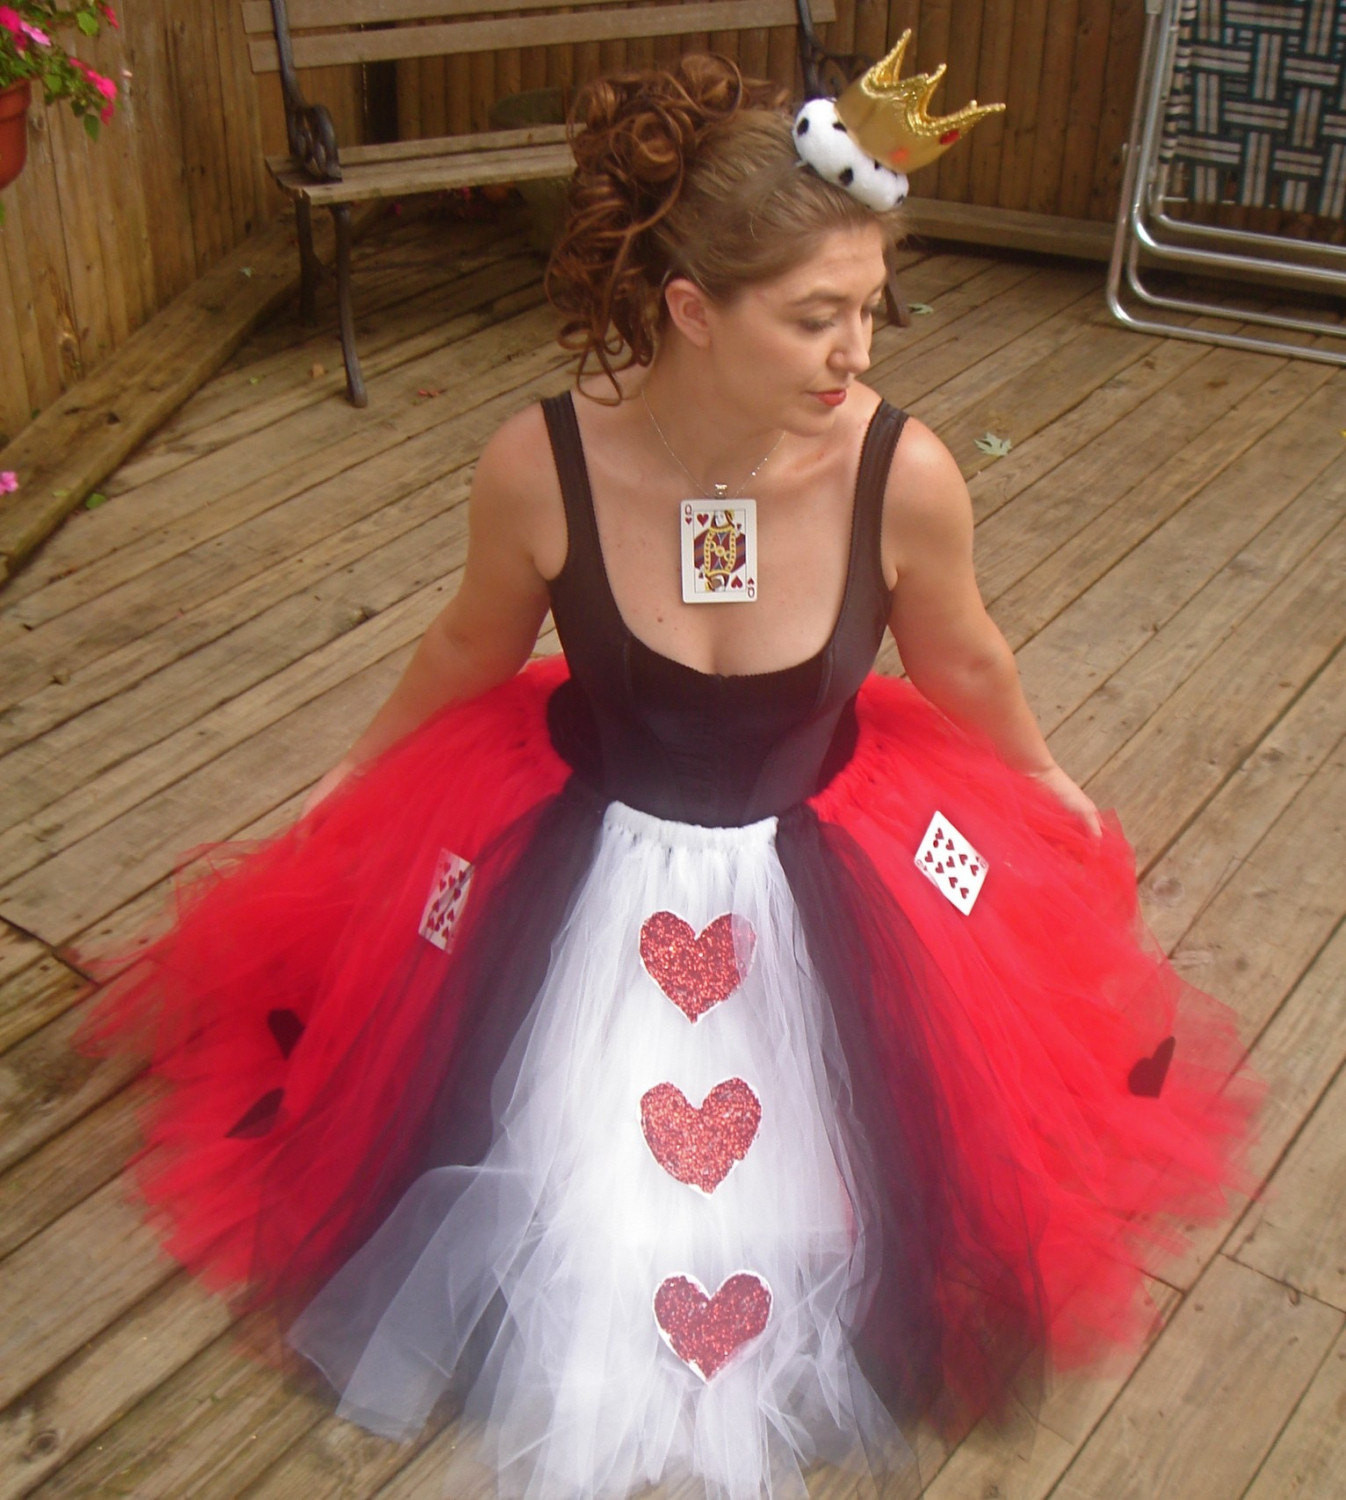 DIY Halloween Costumes With Tutus
 Queen of Hearts Adult Boutique Tutu Skirt Costume